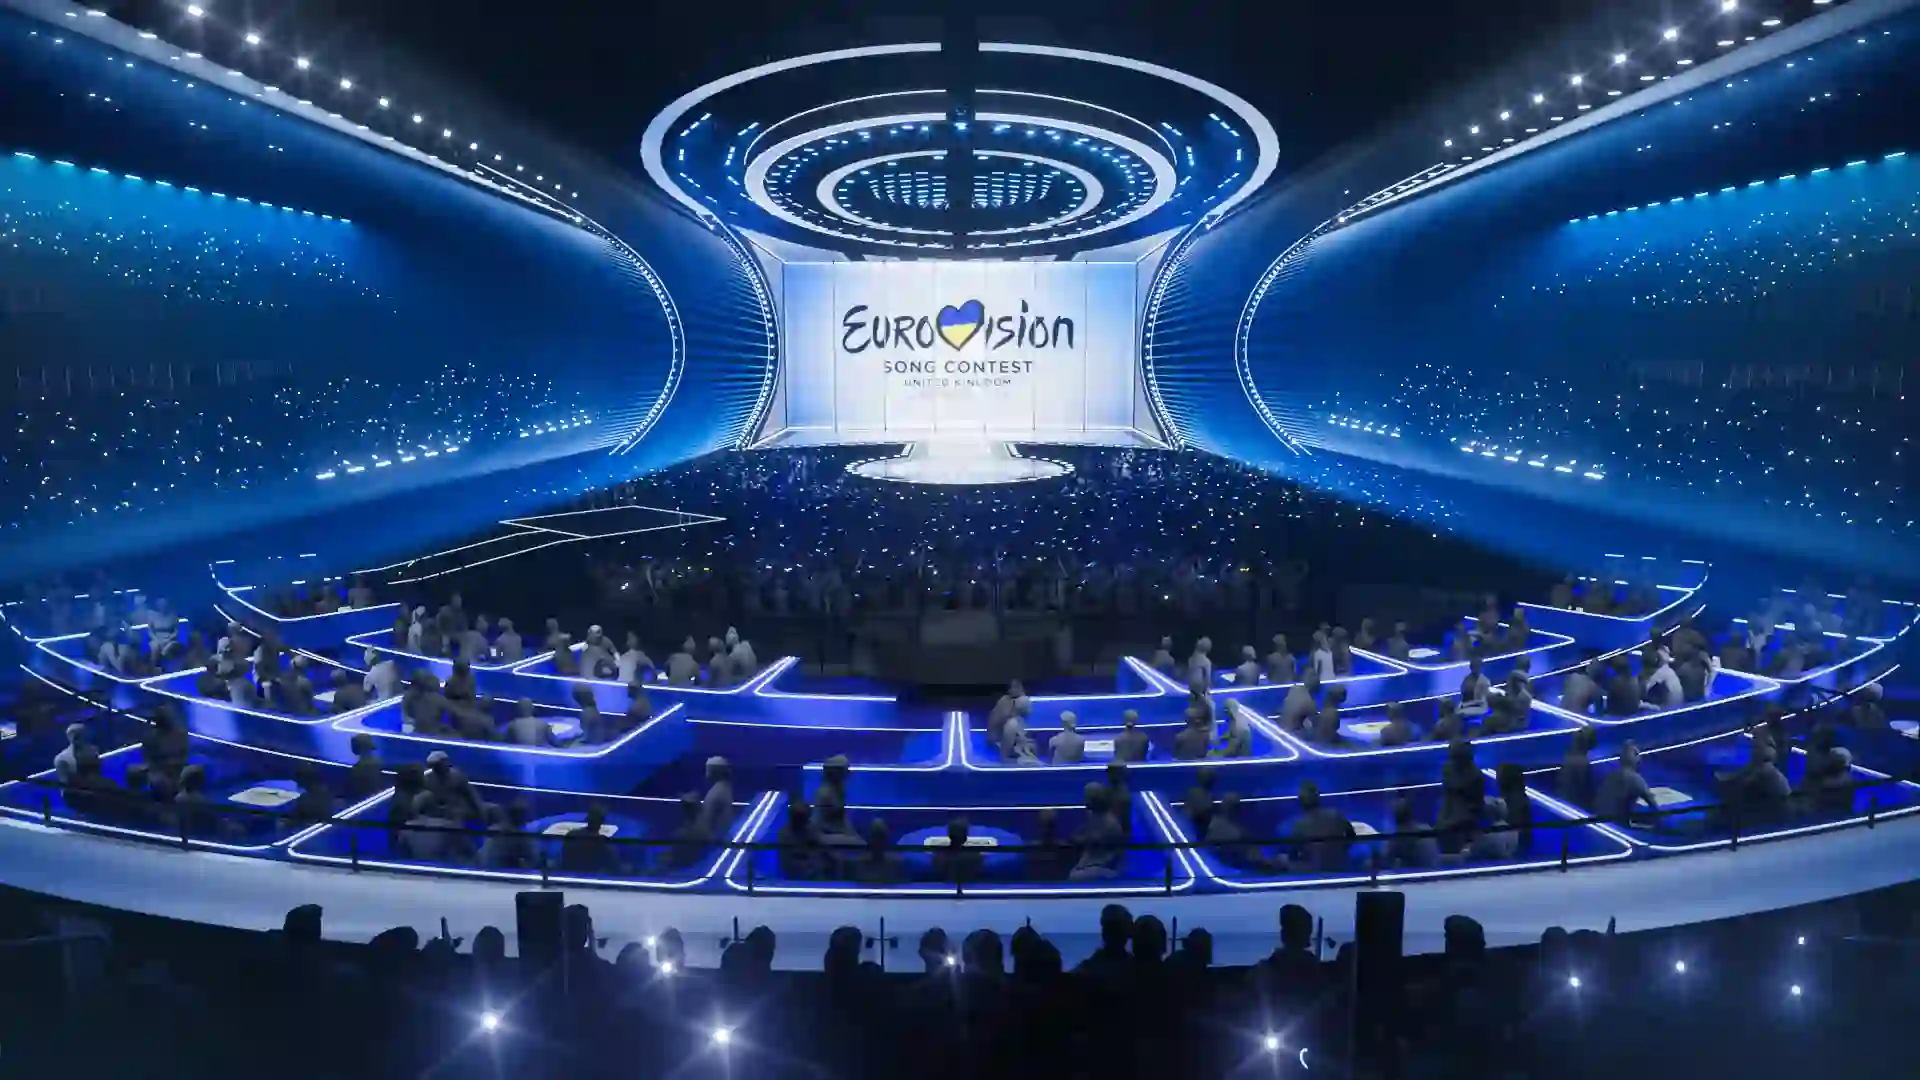 Top 10 favorites to win Eurovision 2023